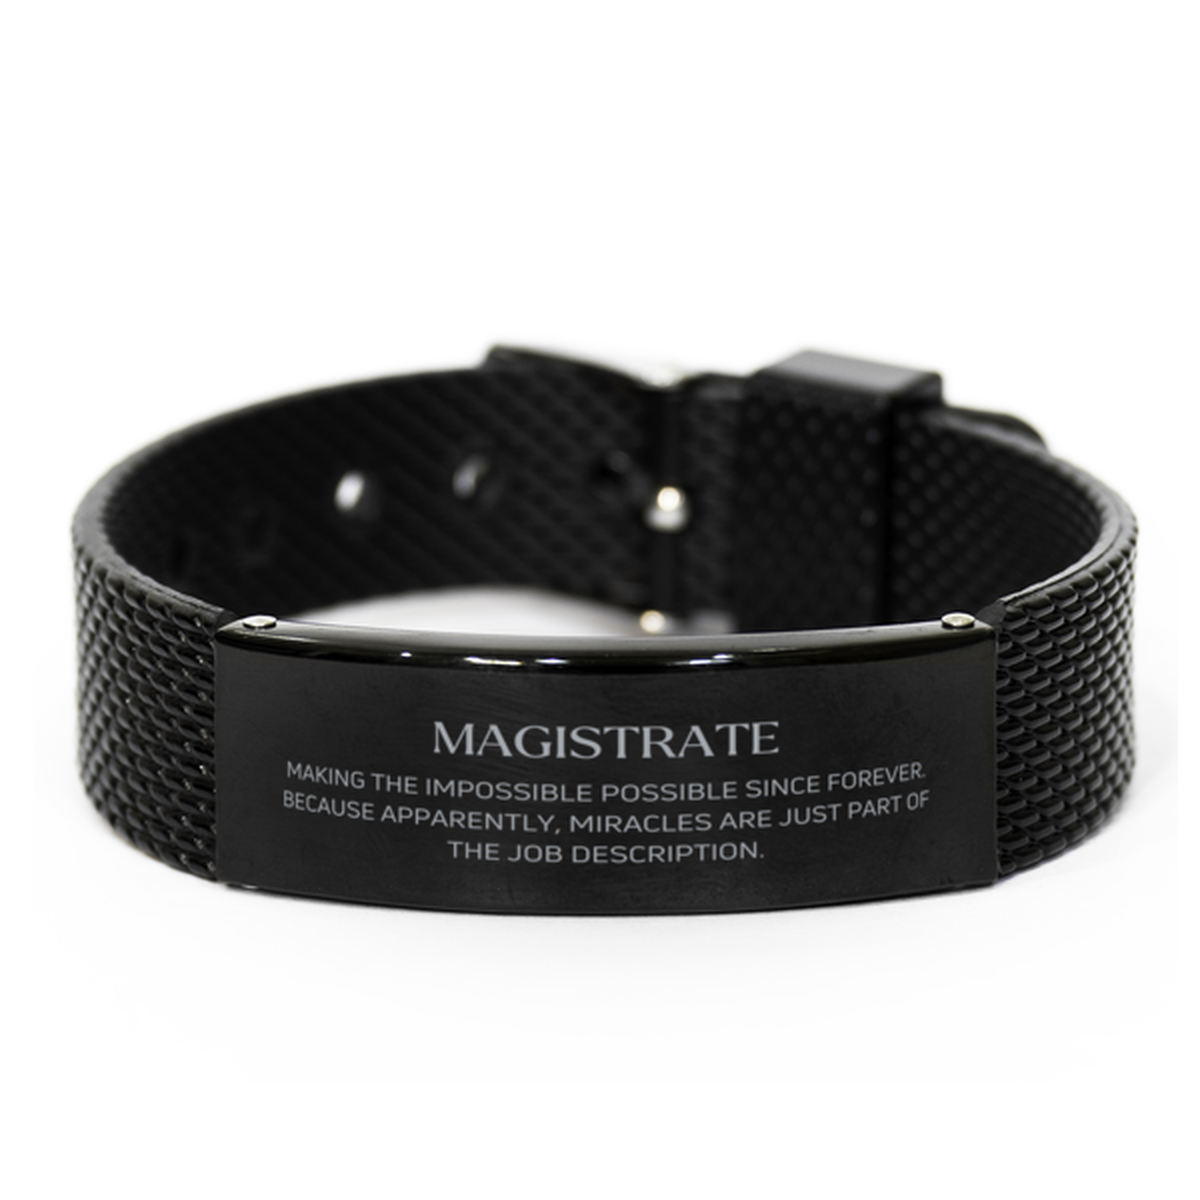 Funny Magistrate Gifts, Miracles are just part of the job description, Inspirational Birthday Black Shark Mesh Bracelet For Magistrate, Men, Women, Coworkers, Friends, Boss